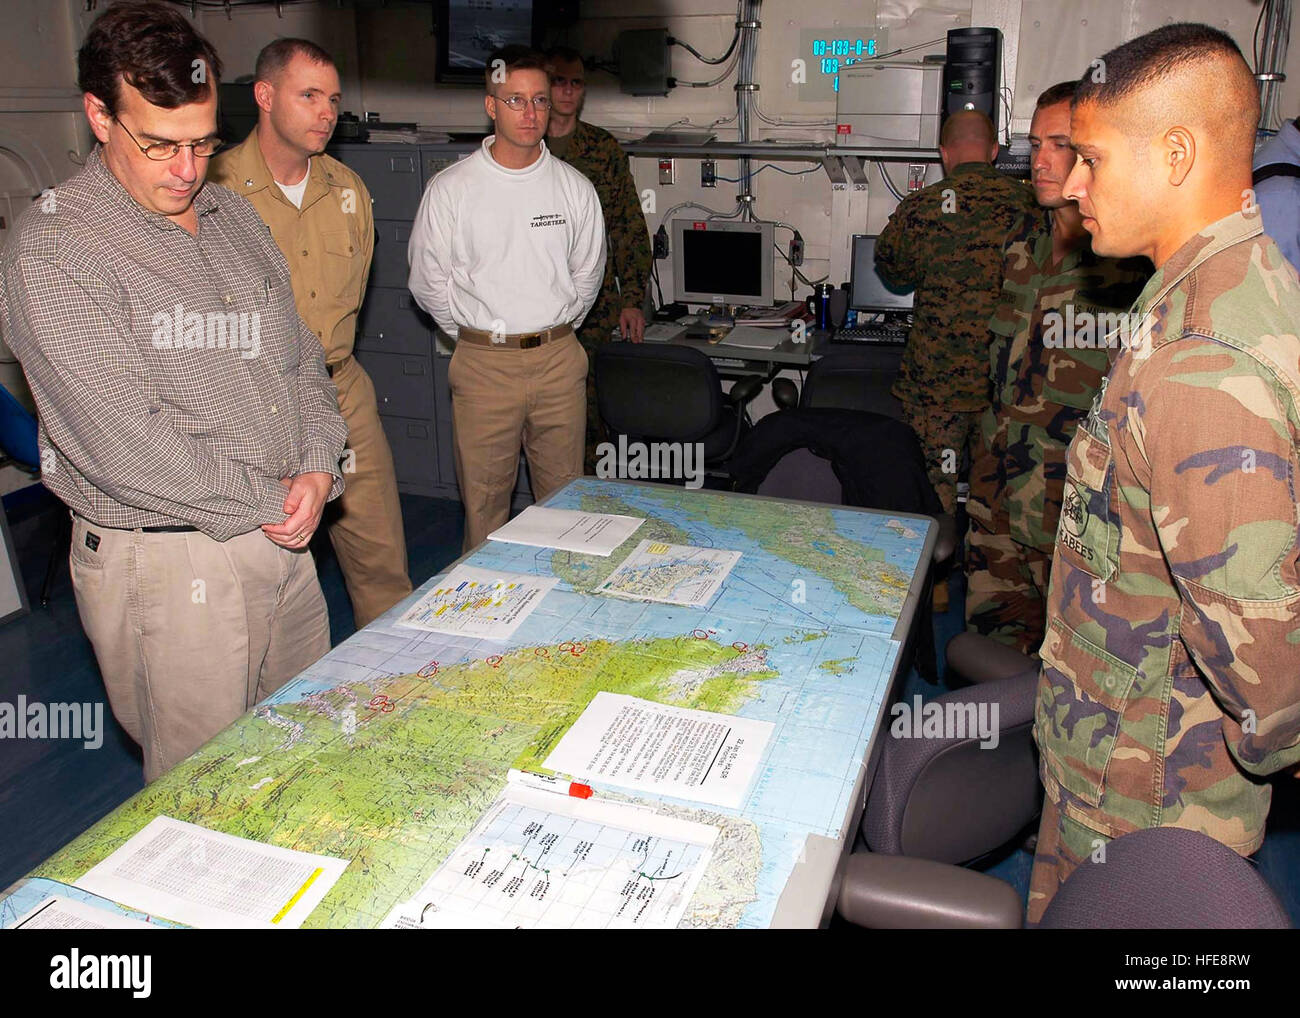 050122-N-6074Y-005 Indian Ocean (Jan. 22, 2005) - U.S. Ambassador to Singapore, the Honorable Frank Lavin, left, listens to a logistics brief from a field doctor in the carrier intelligence center (CVIC) as the intelligence officer, Cmdr. Stephen Roberts looks on. Helicopters and Sailors assigned to the USS Abraham Lincoln (CVN 72) Carrier Strike Group are supporting Operation Unified Assistance, the humanitarian operation effort in the wake of the Tsunami that struck South East Asia. The Abraham Lincoln Carrier Strike Group is currently operating in the Indian Ocean off the waters of Indonesi Stock Photo